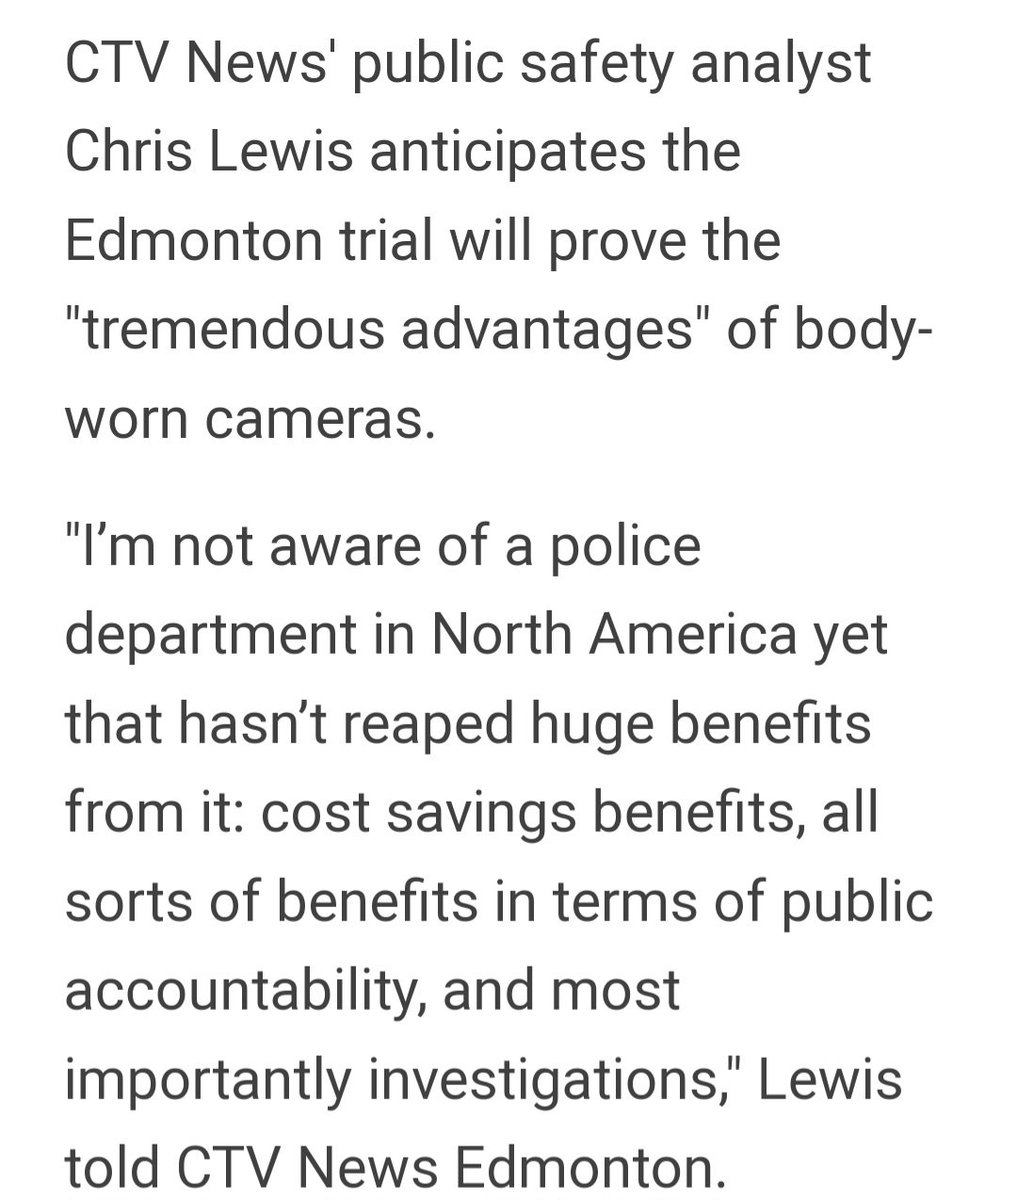 Great, and accurate, comments from @ChrisLewisLLS about the use of #BodyWornCameras #BWC in this article: